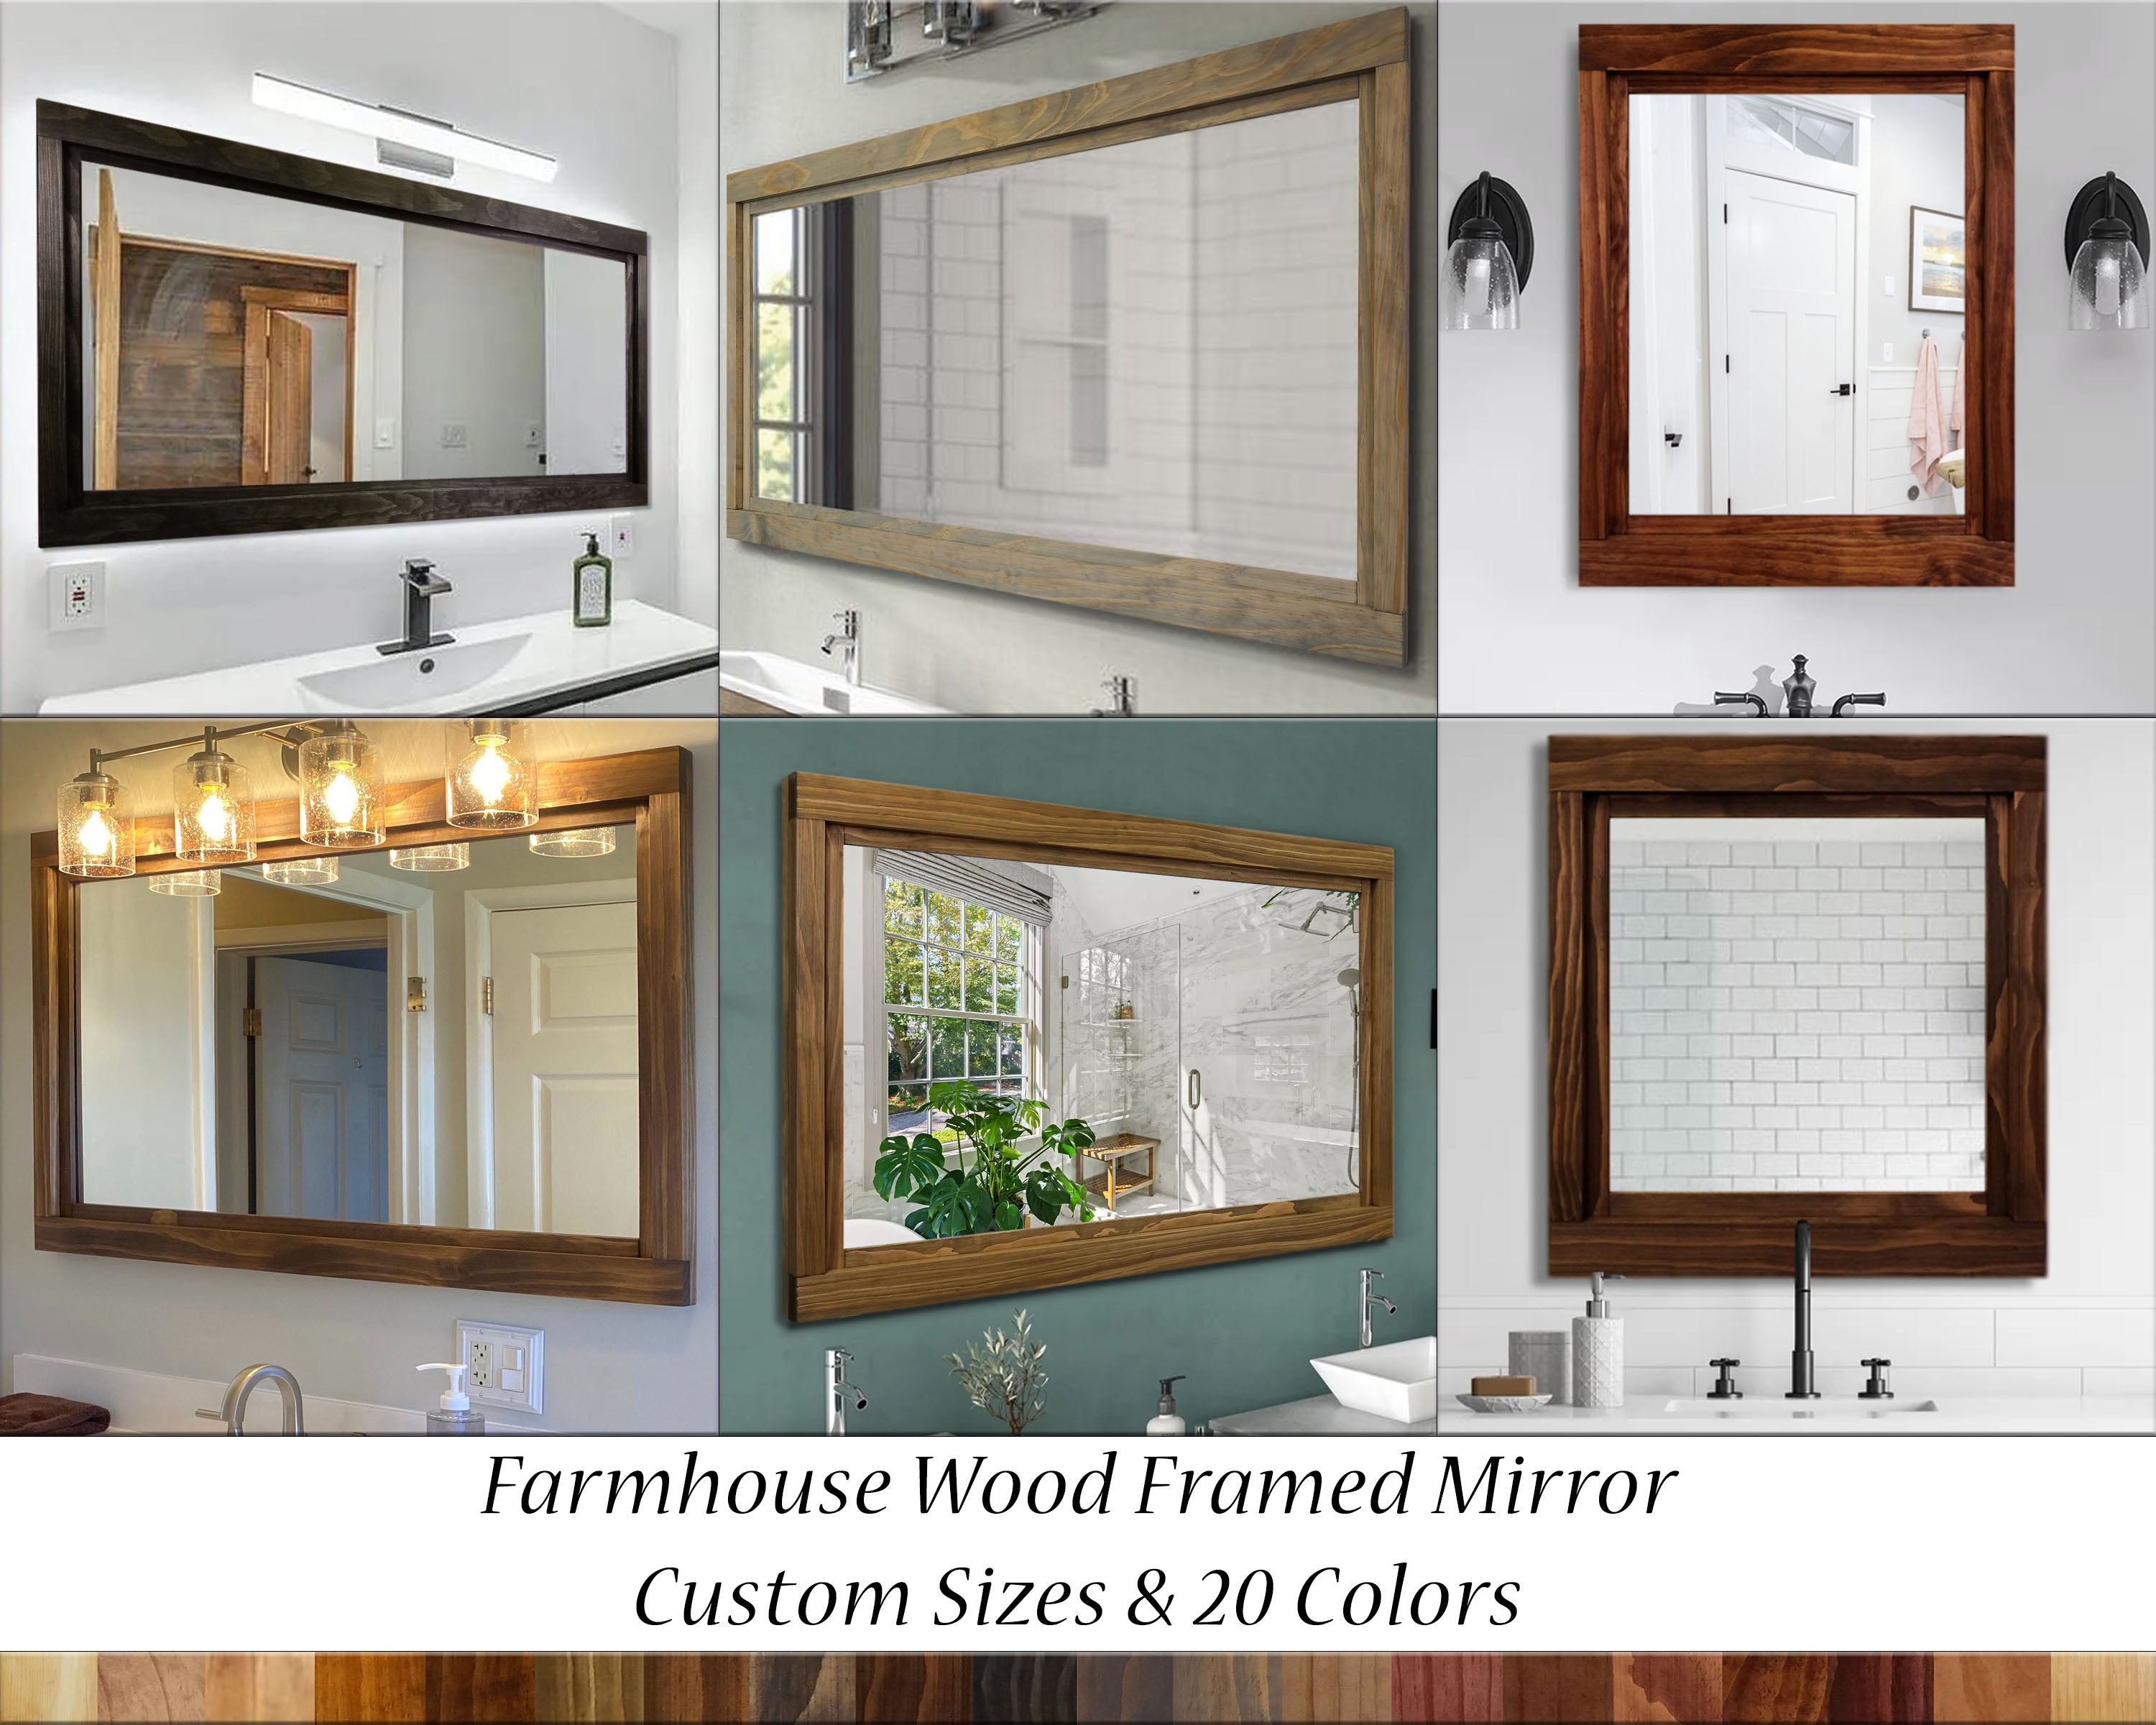 Farmhouse Framed Mirror, Custom Sizes, 20 Stain Colors, Handmade in the USA by Lane of Lenore